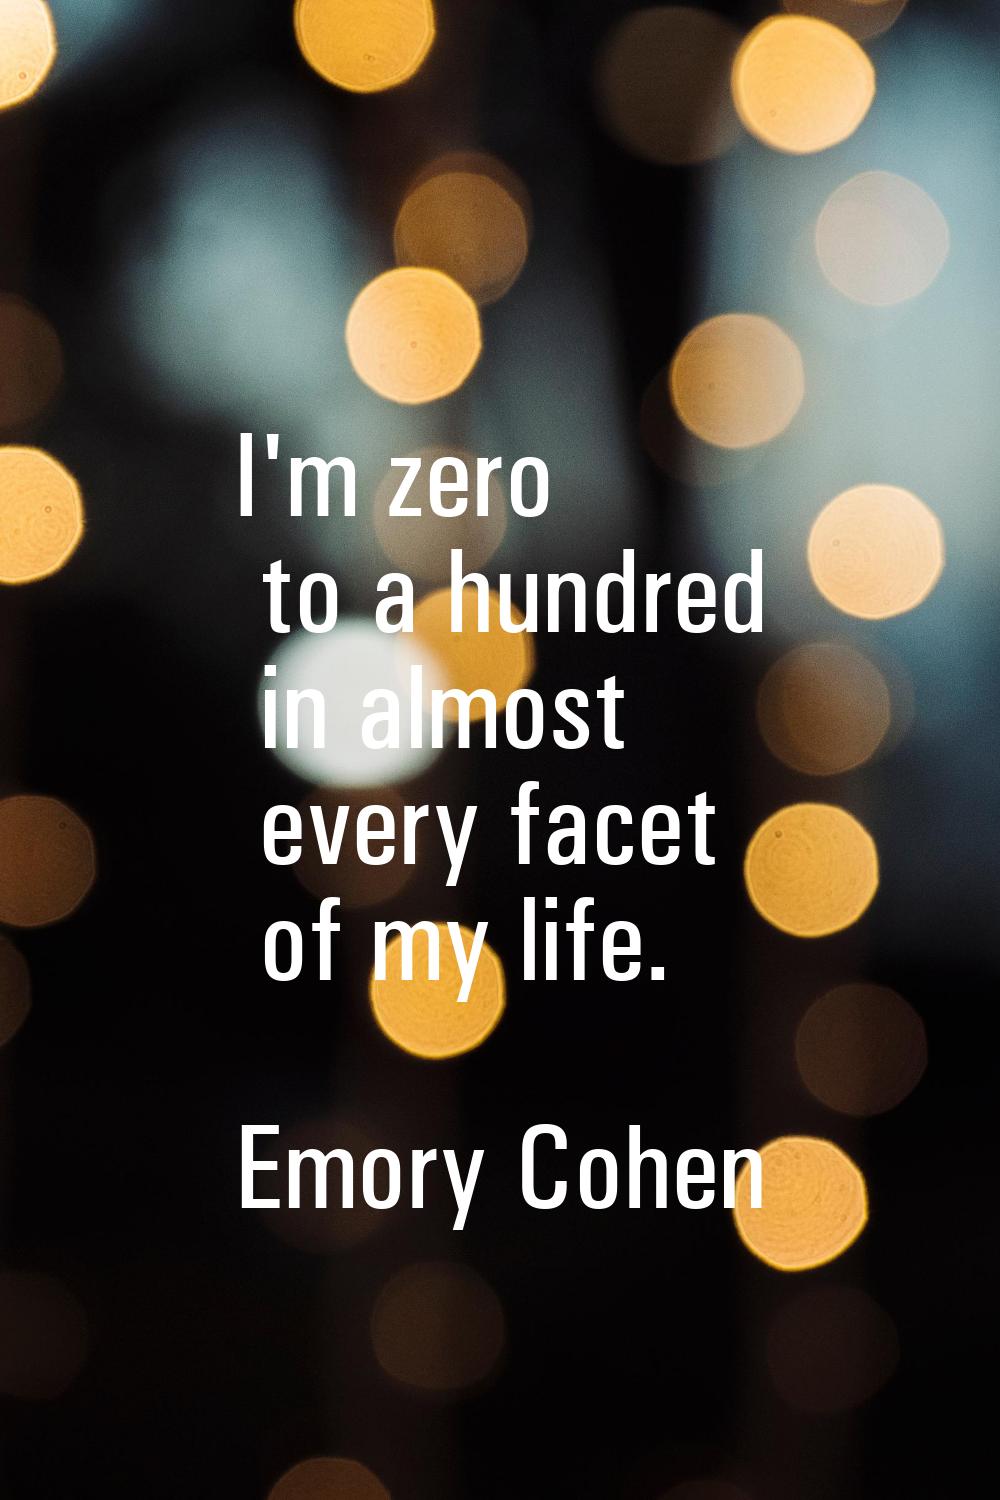 I'm zero to a hundred in almost every facet of my life.